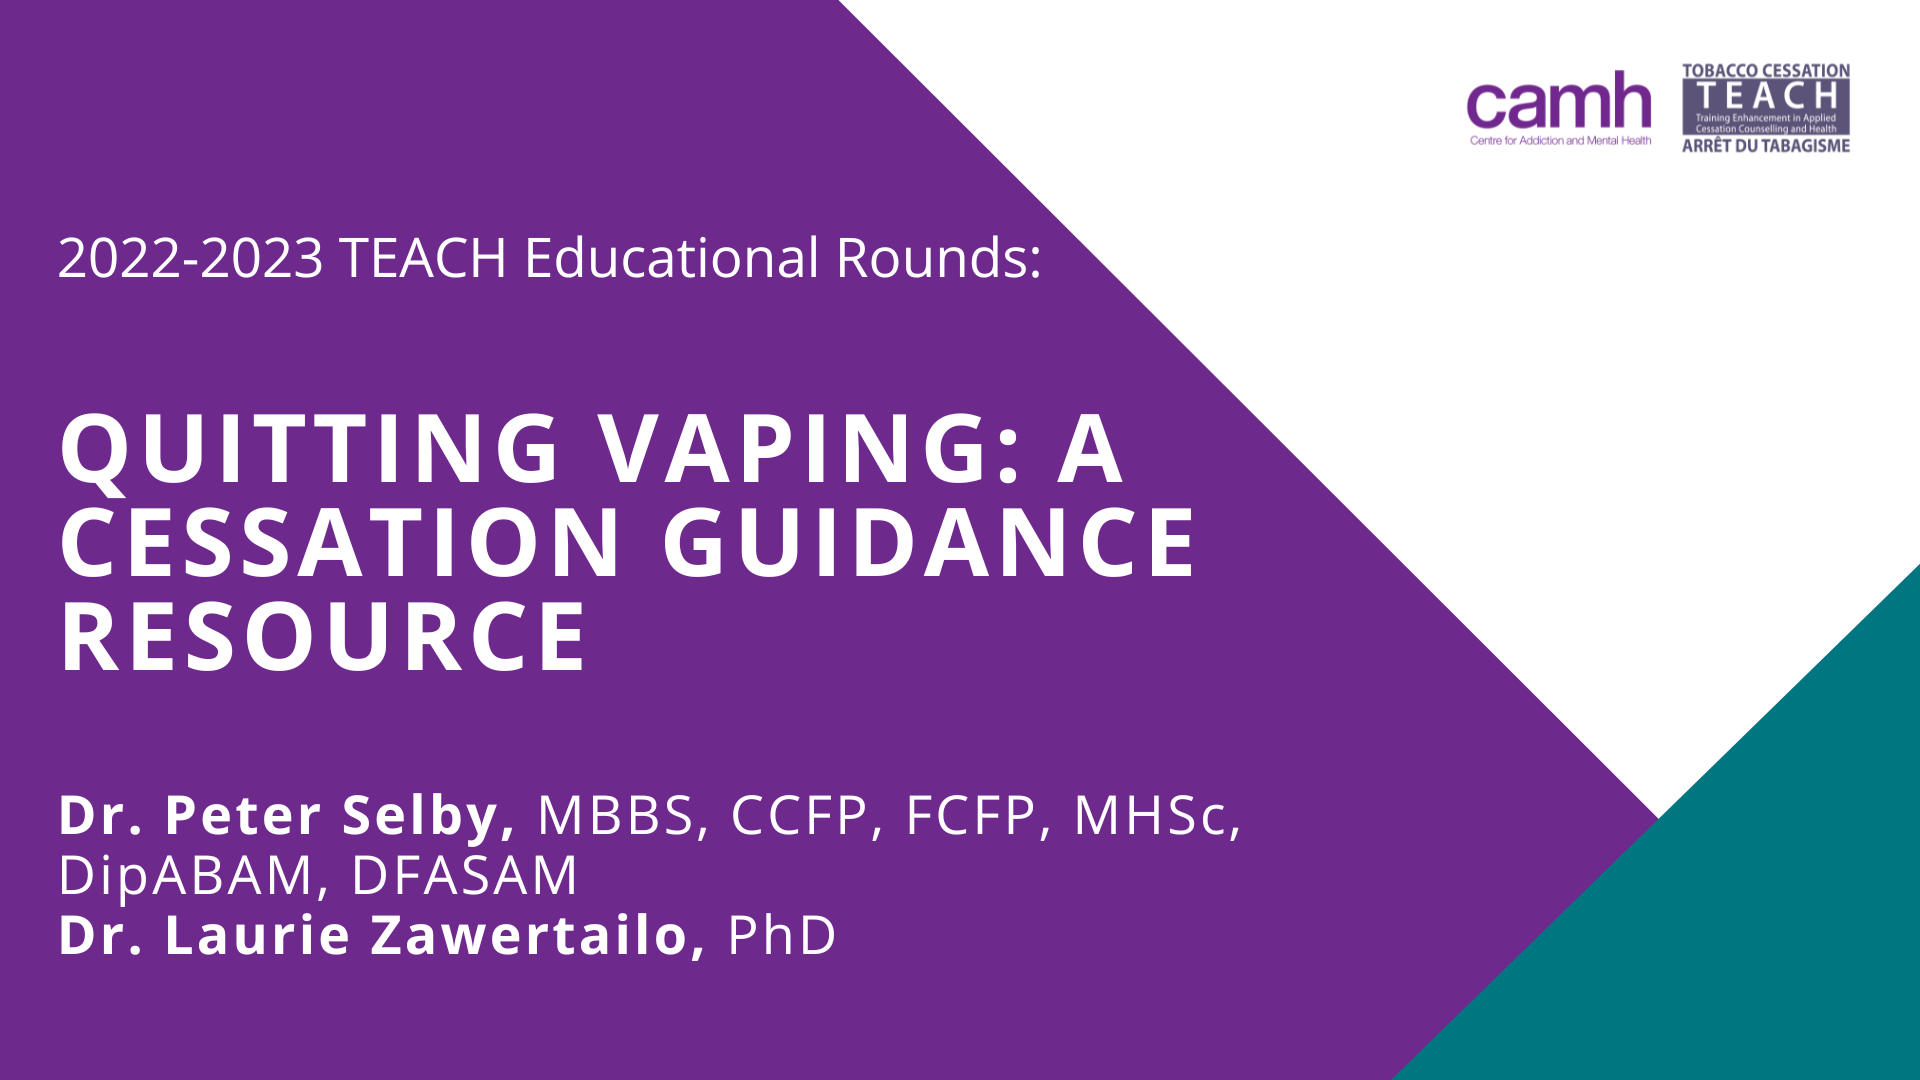 Quitting Vaping - A Cessation Guidance Resource (Thumbnail).png